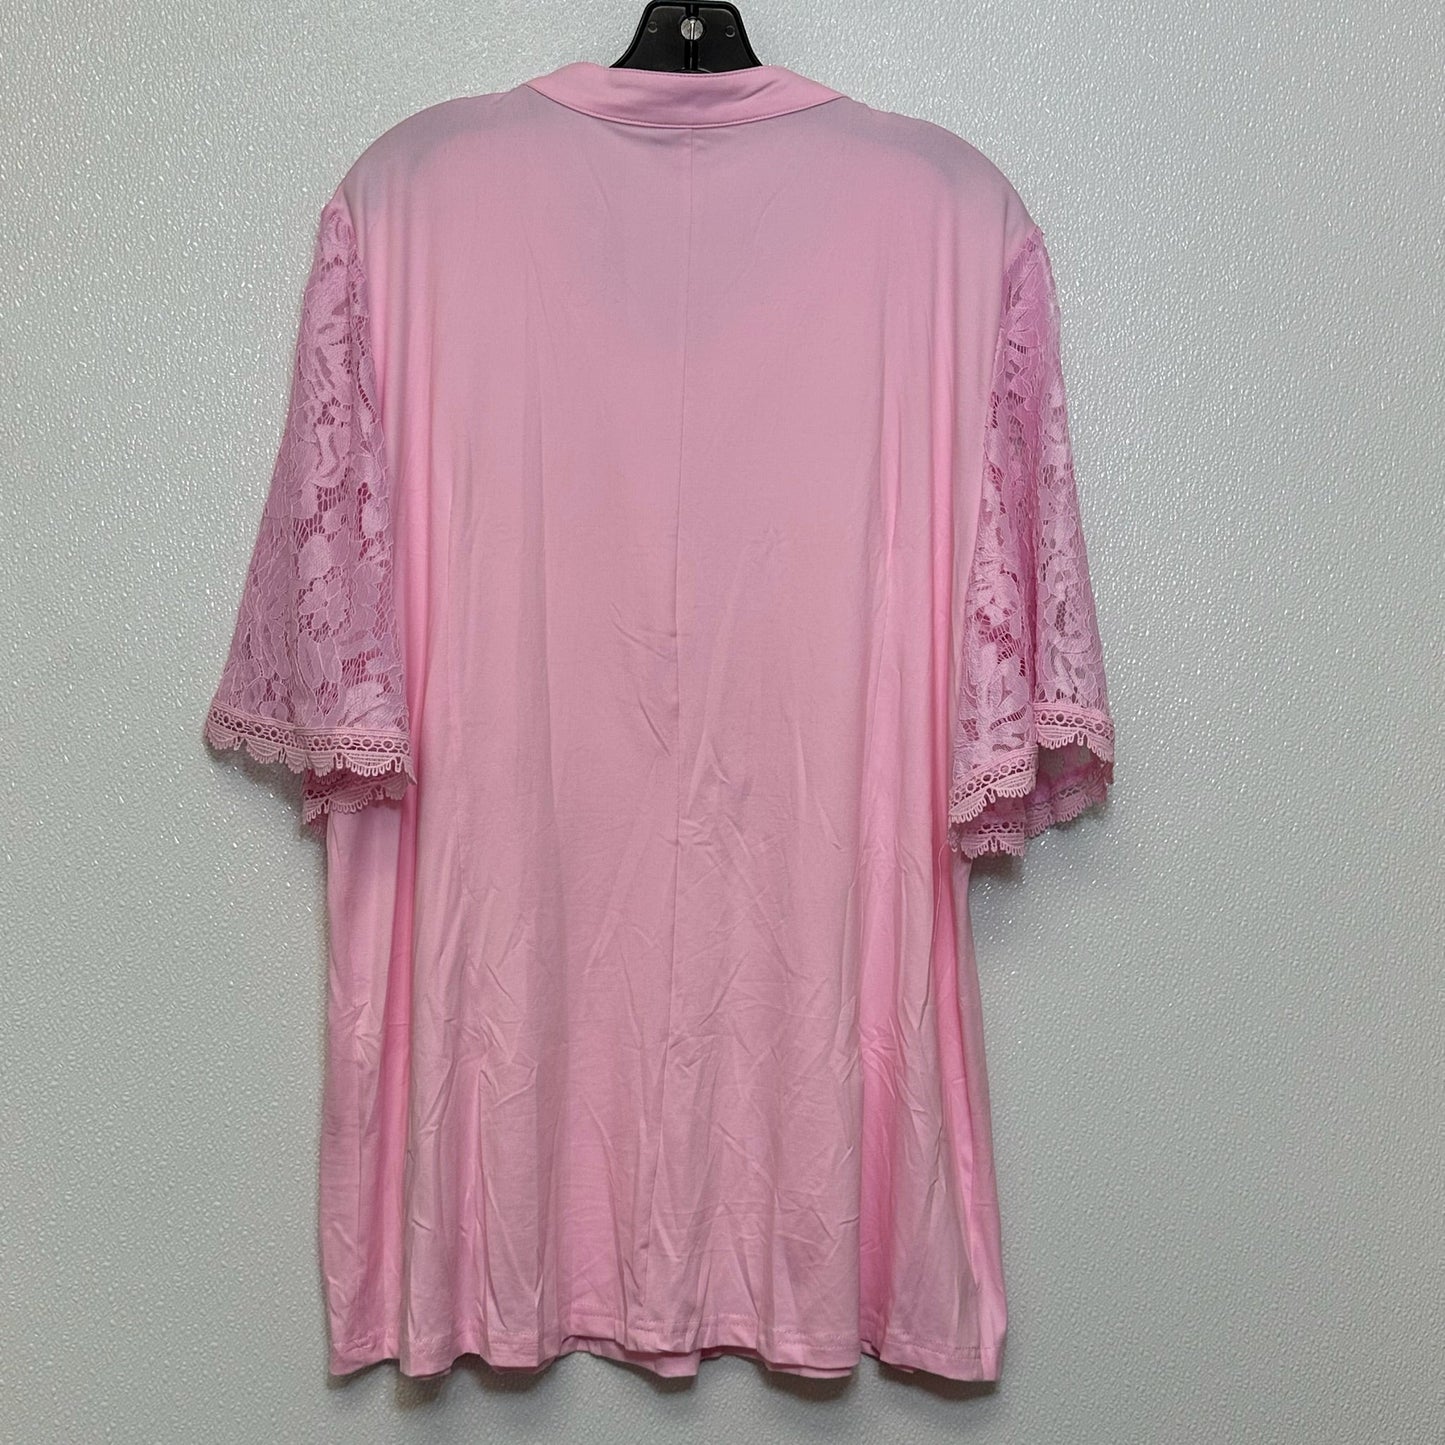 Candy Pink Top Short Sleeve Clothes Mentor, Size 2x